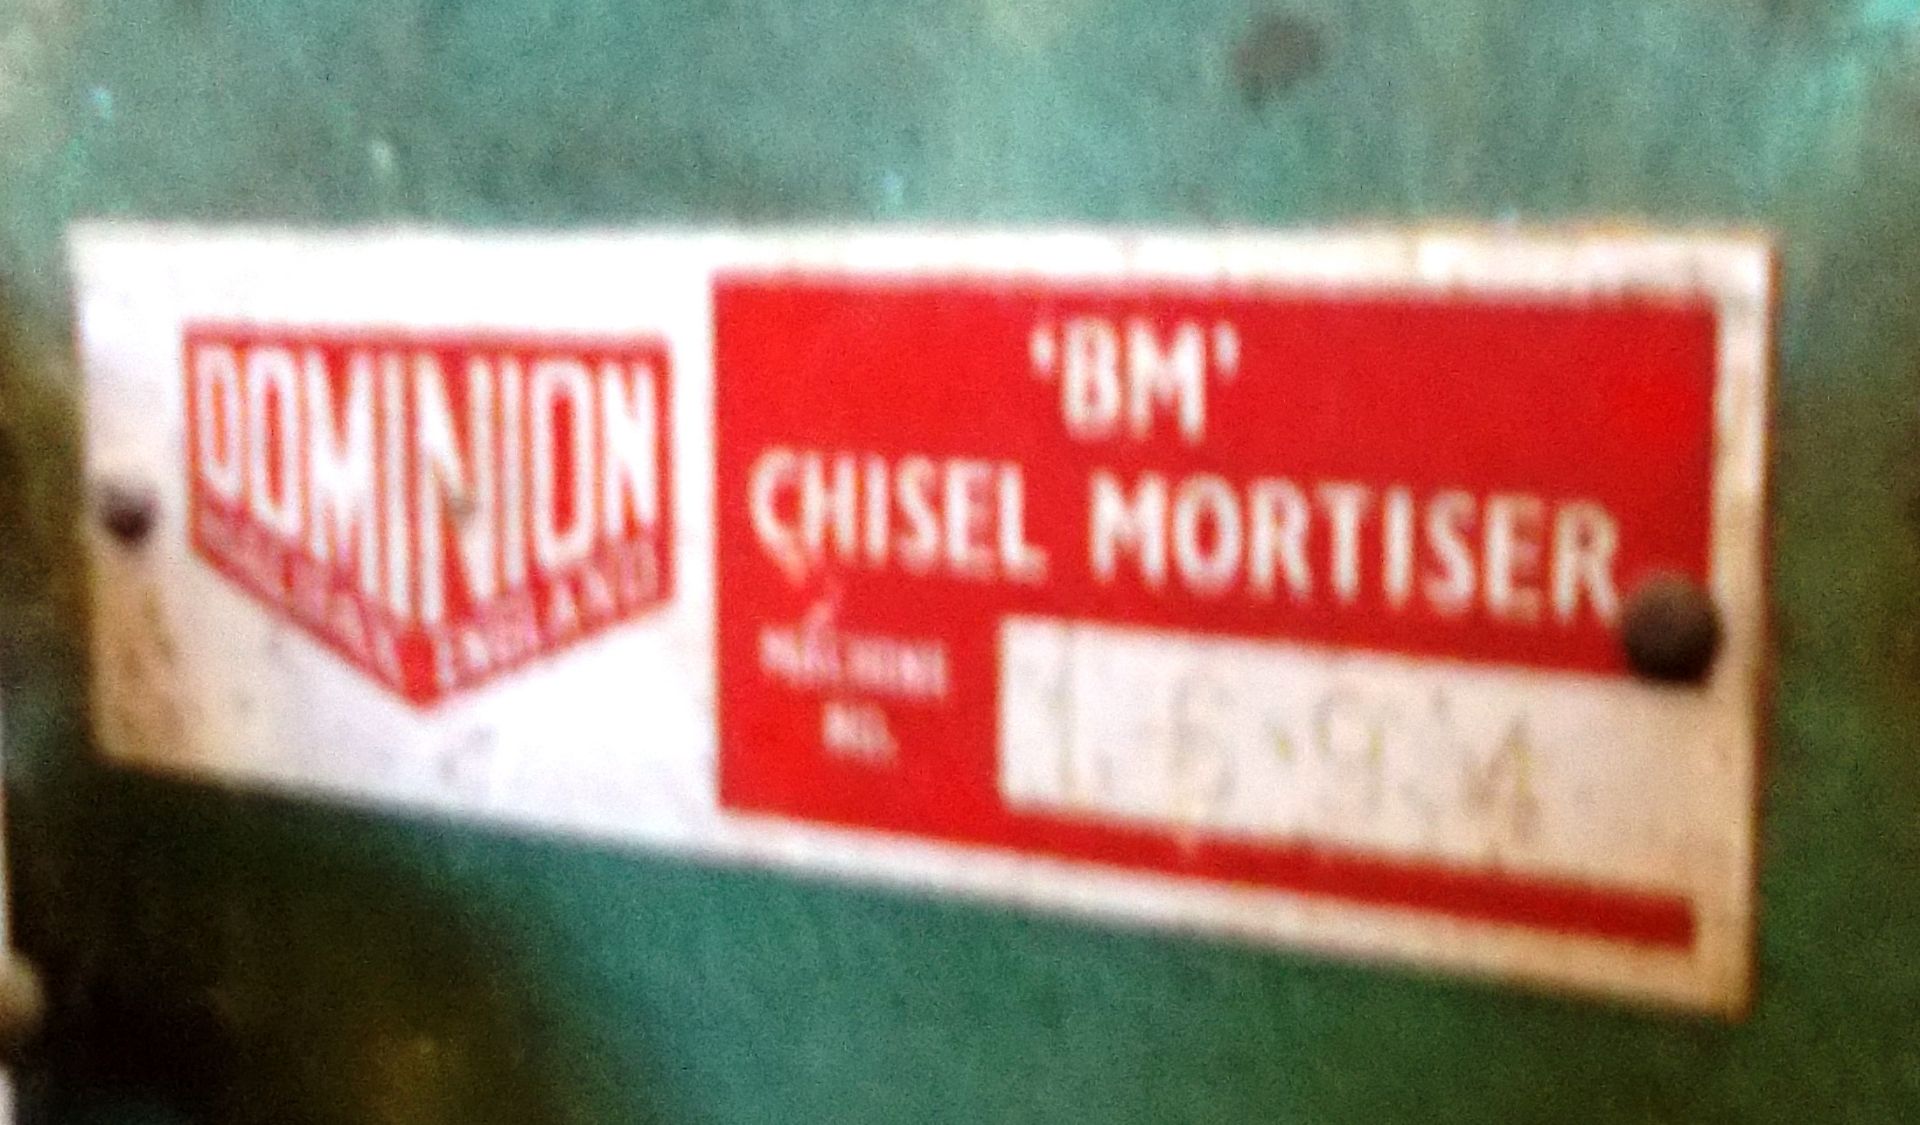 Dominion ‘BM’ chisel morticer, Machine number 1694, Serial Number U168898. *To be disconnected by - Image 3 of 3